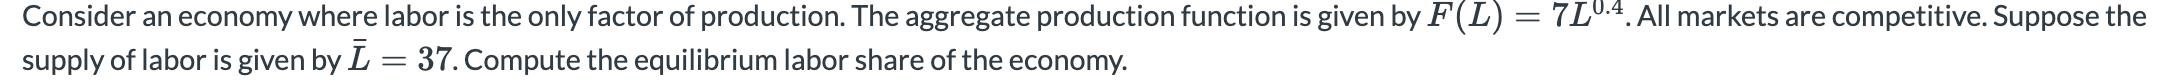 = Consider an economy where labor is the only factor of production. The aggregate production function is given by F(L) = 7L0.